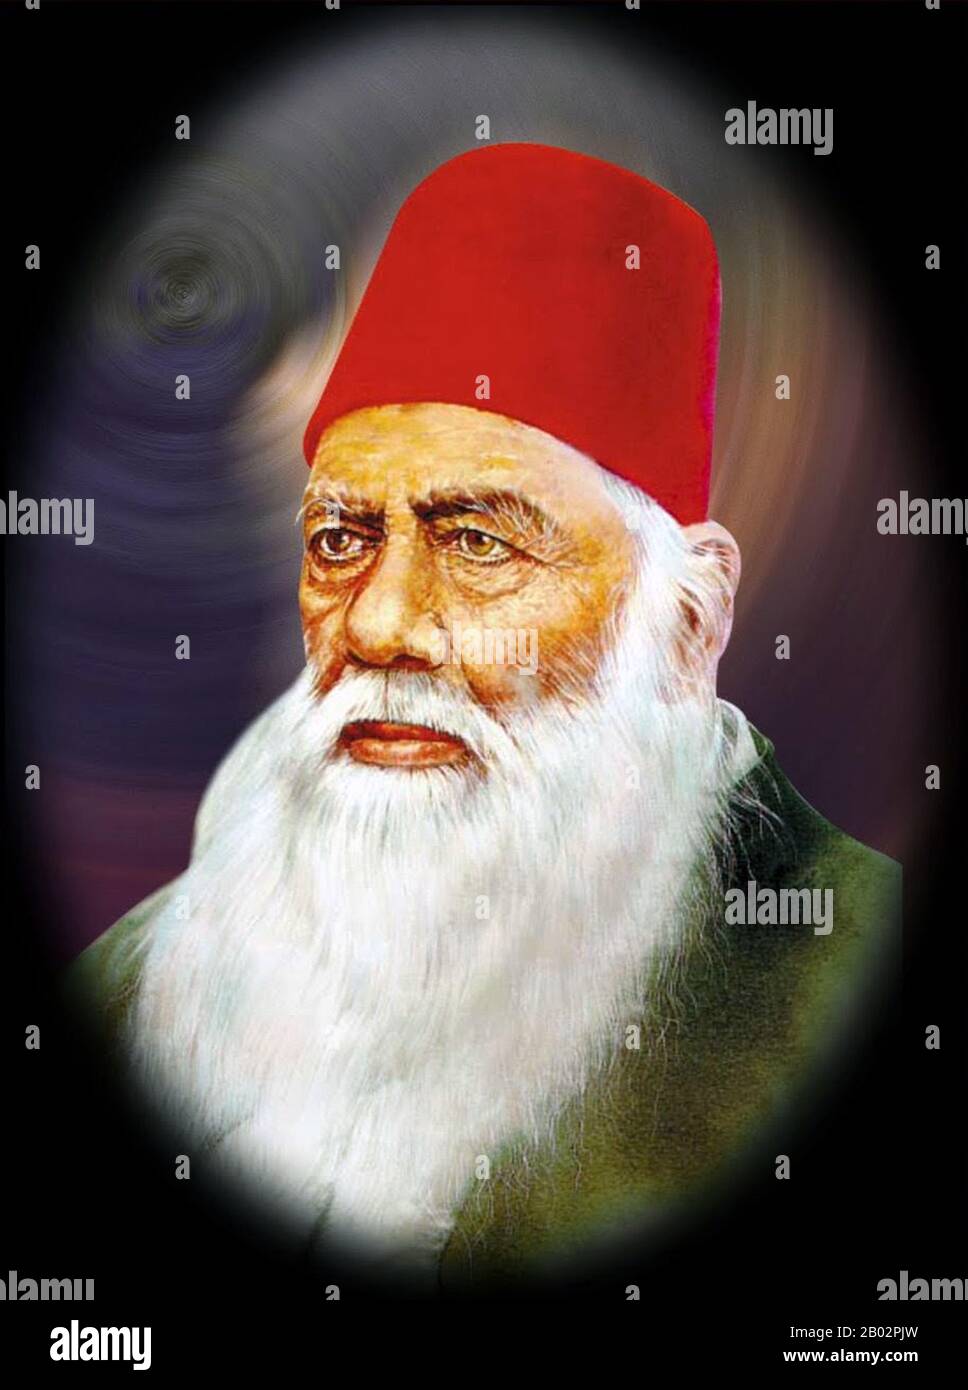 Born into Mughal nobility, Sir Syed earned a reputation as a distinguished scholar while working as a jurist for the British East India Company's rule in India. During the Indian Rebellion of 1857, he remained loyal to the British Empire and was noted for his actions in saving European lives.  After the rebellion, he penned the booklet 'The Causes of the Indian Mutiny' – a daring critique, at the time, of British policies that he blamed for causing the revolt. Believing that the future of Muslims was threatened by the rigidity of their orthodox outlook, Sir Syed began promoting Western–style s Stock Photo